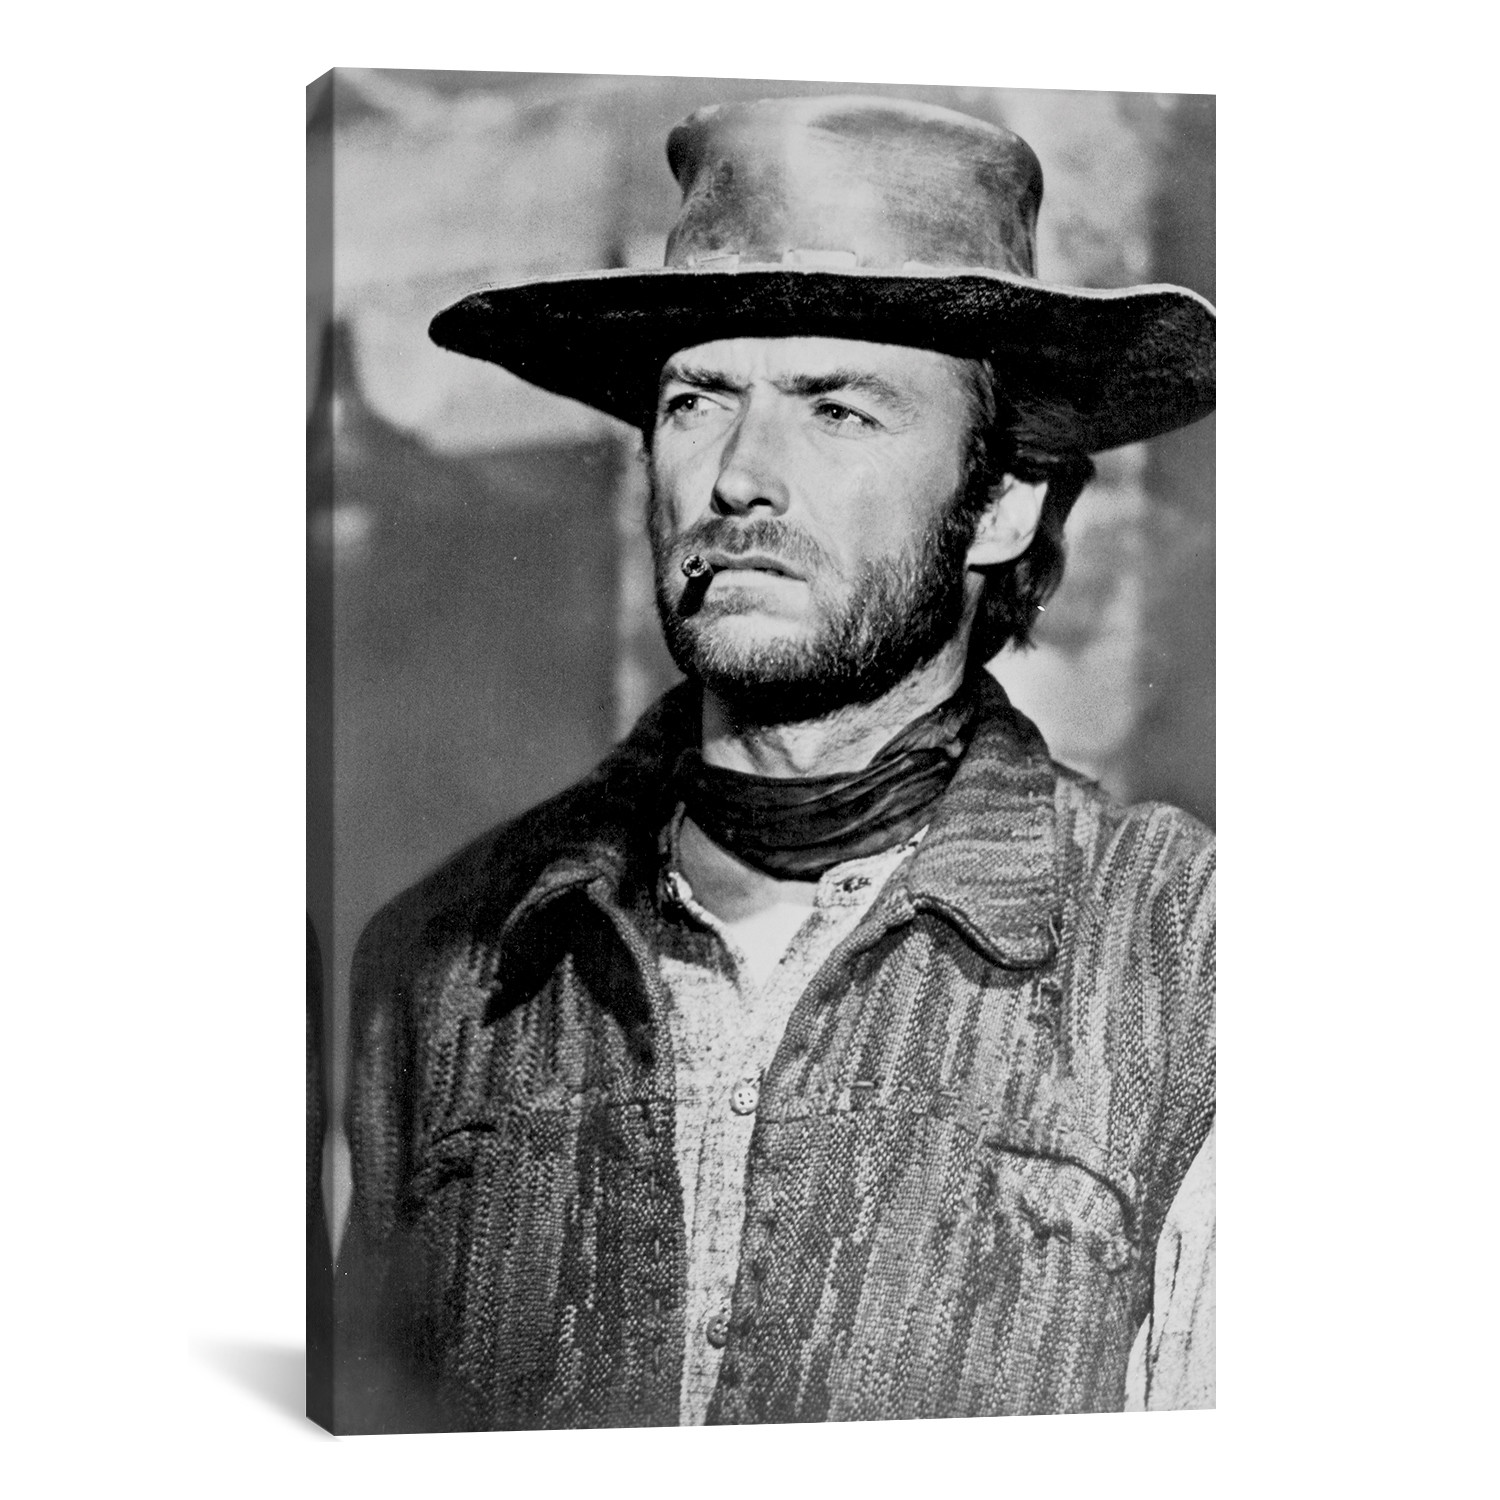 Clint Eastwood Looking Away In Cowboy Attire With Cigarette (26